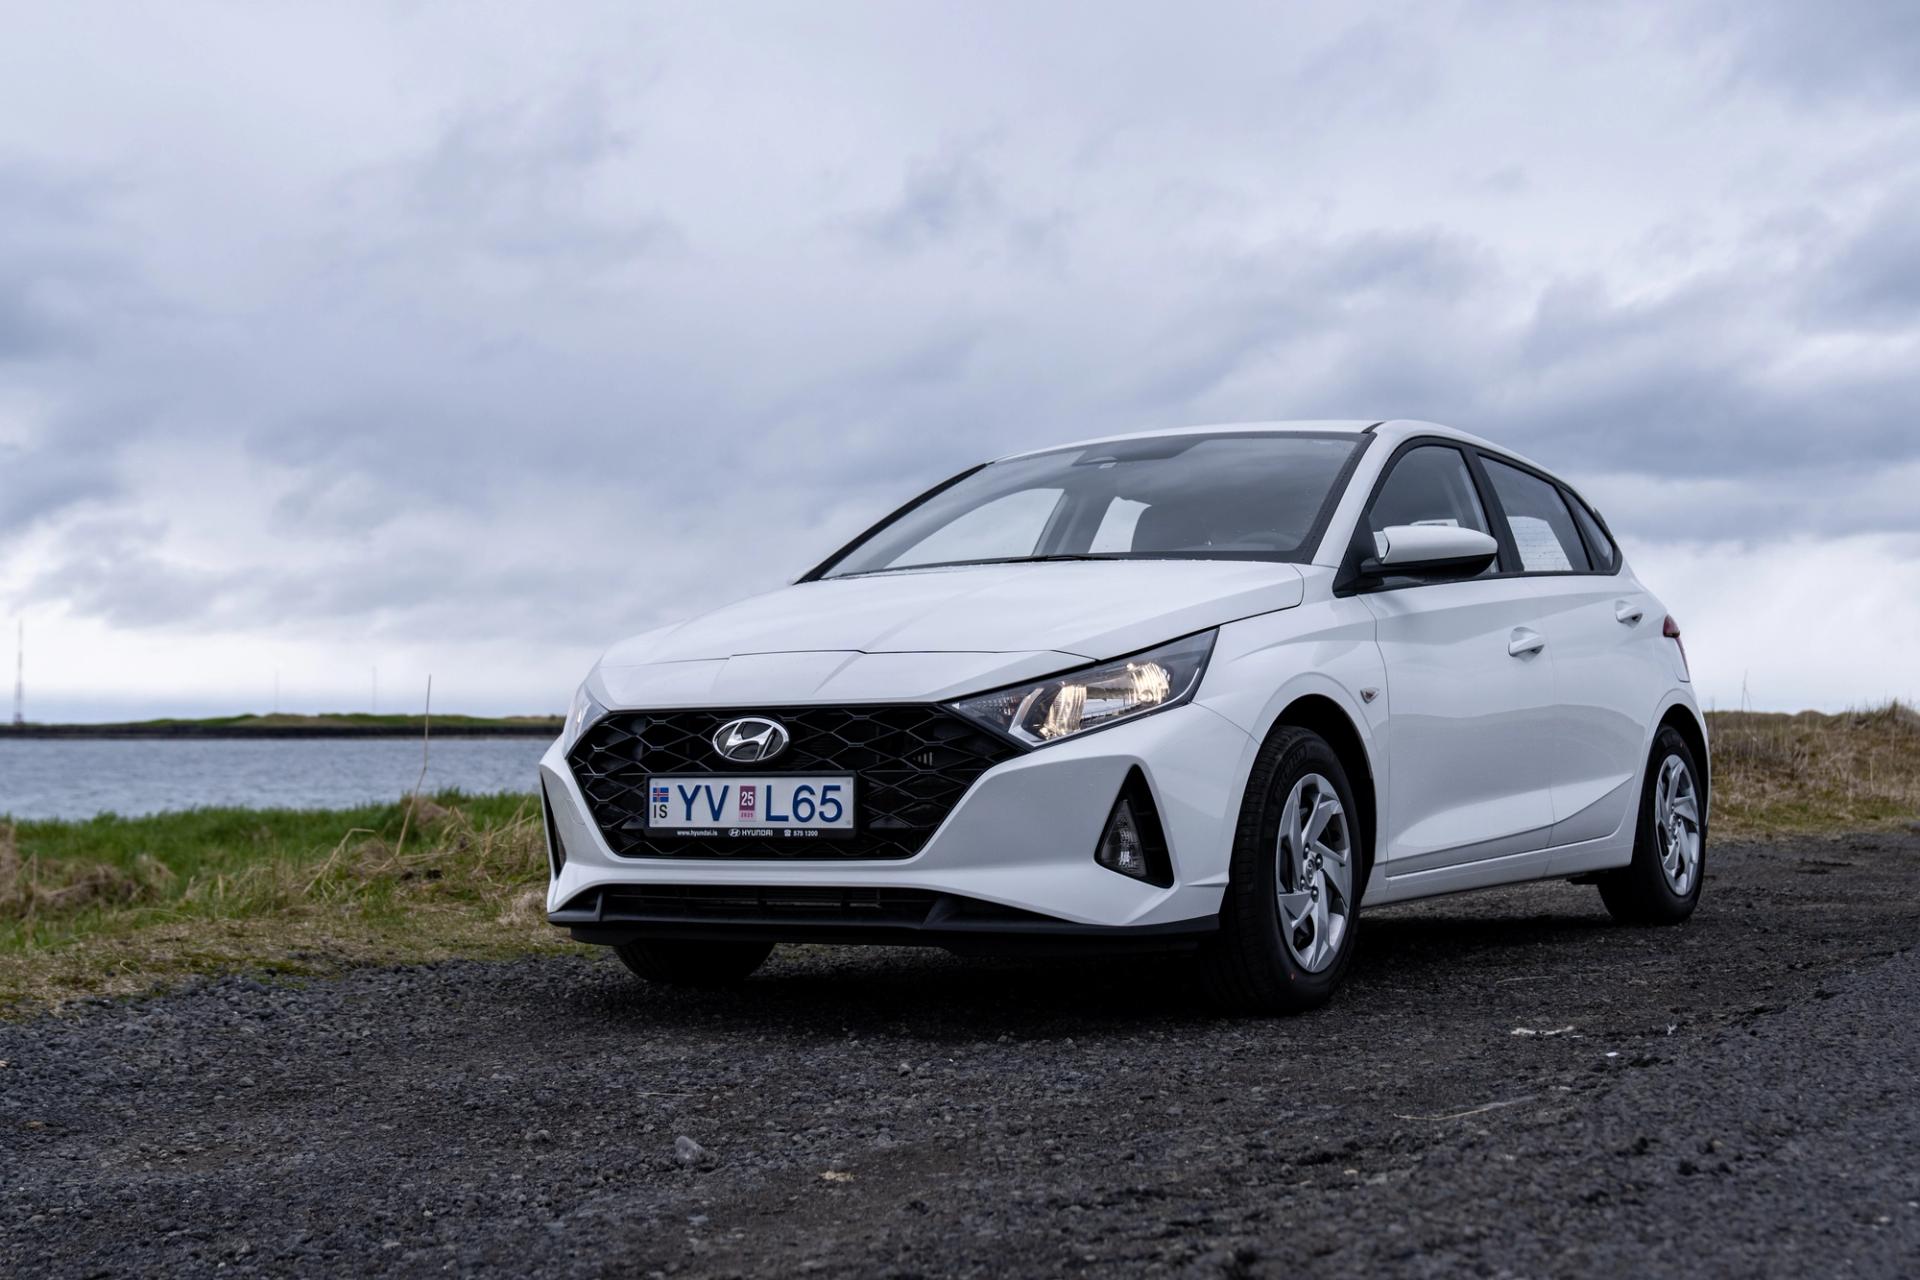 Hyundai i20 on a road in Iceland with a model standing 